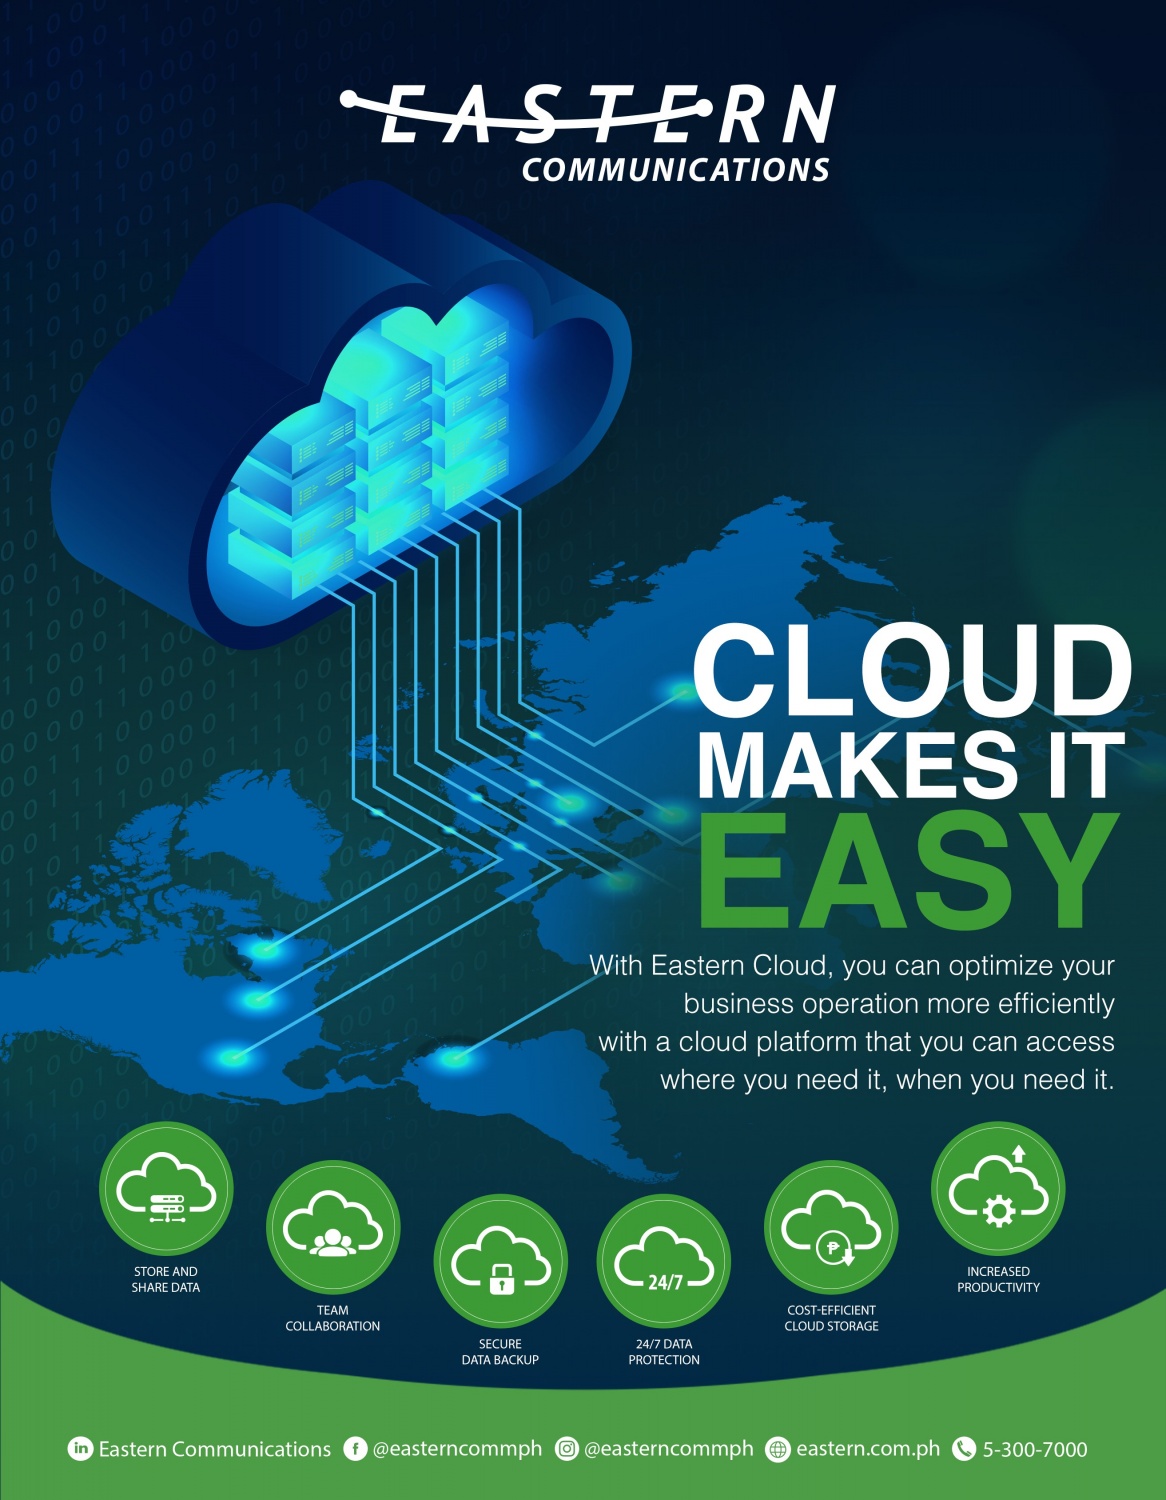 Fostering Business Productivity Through Cloud